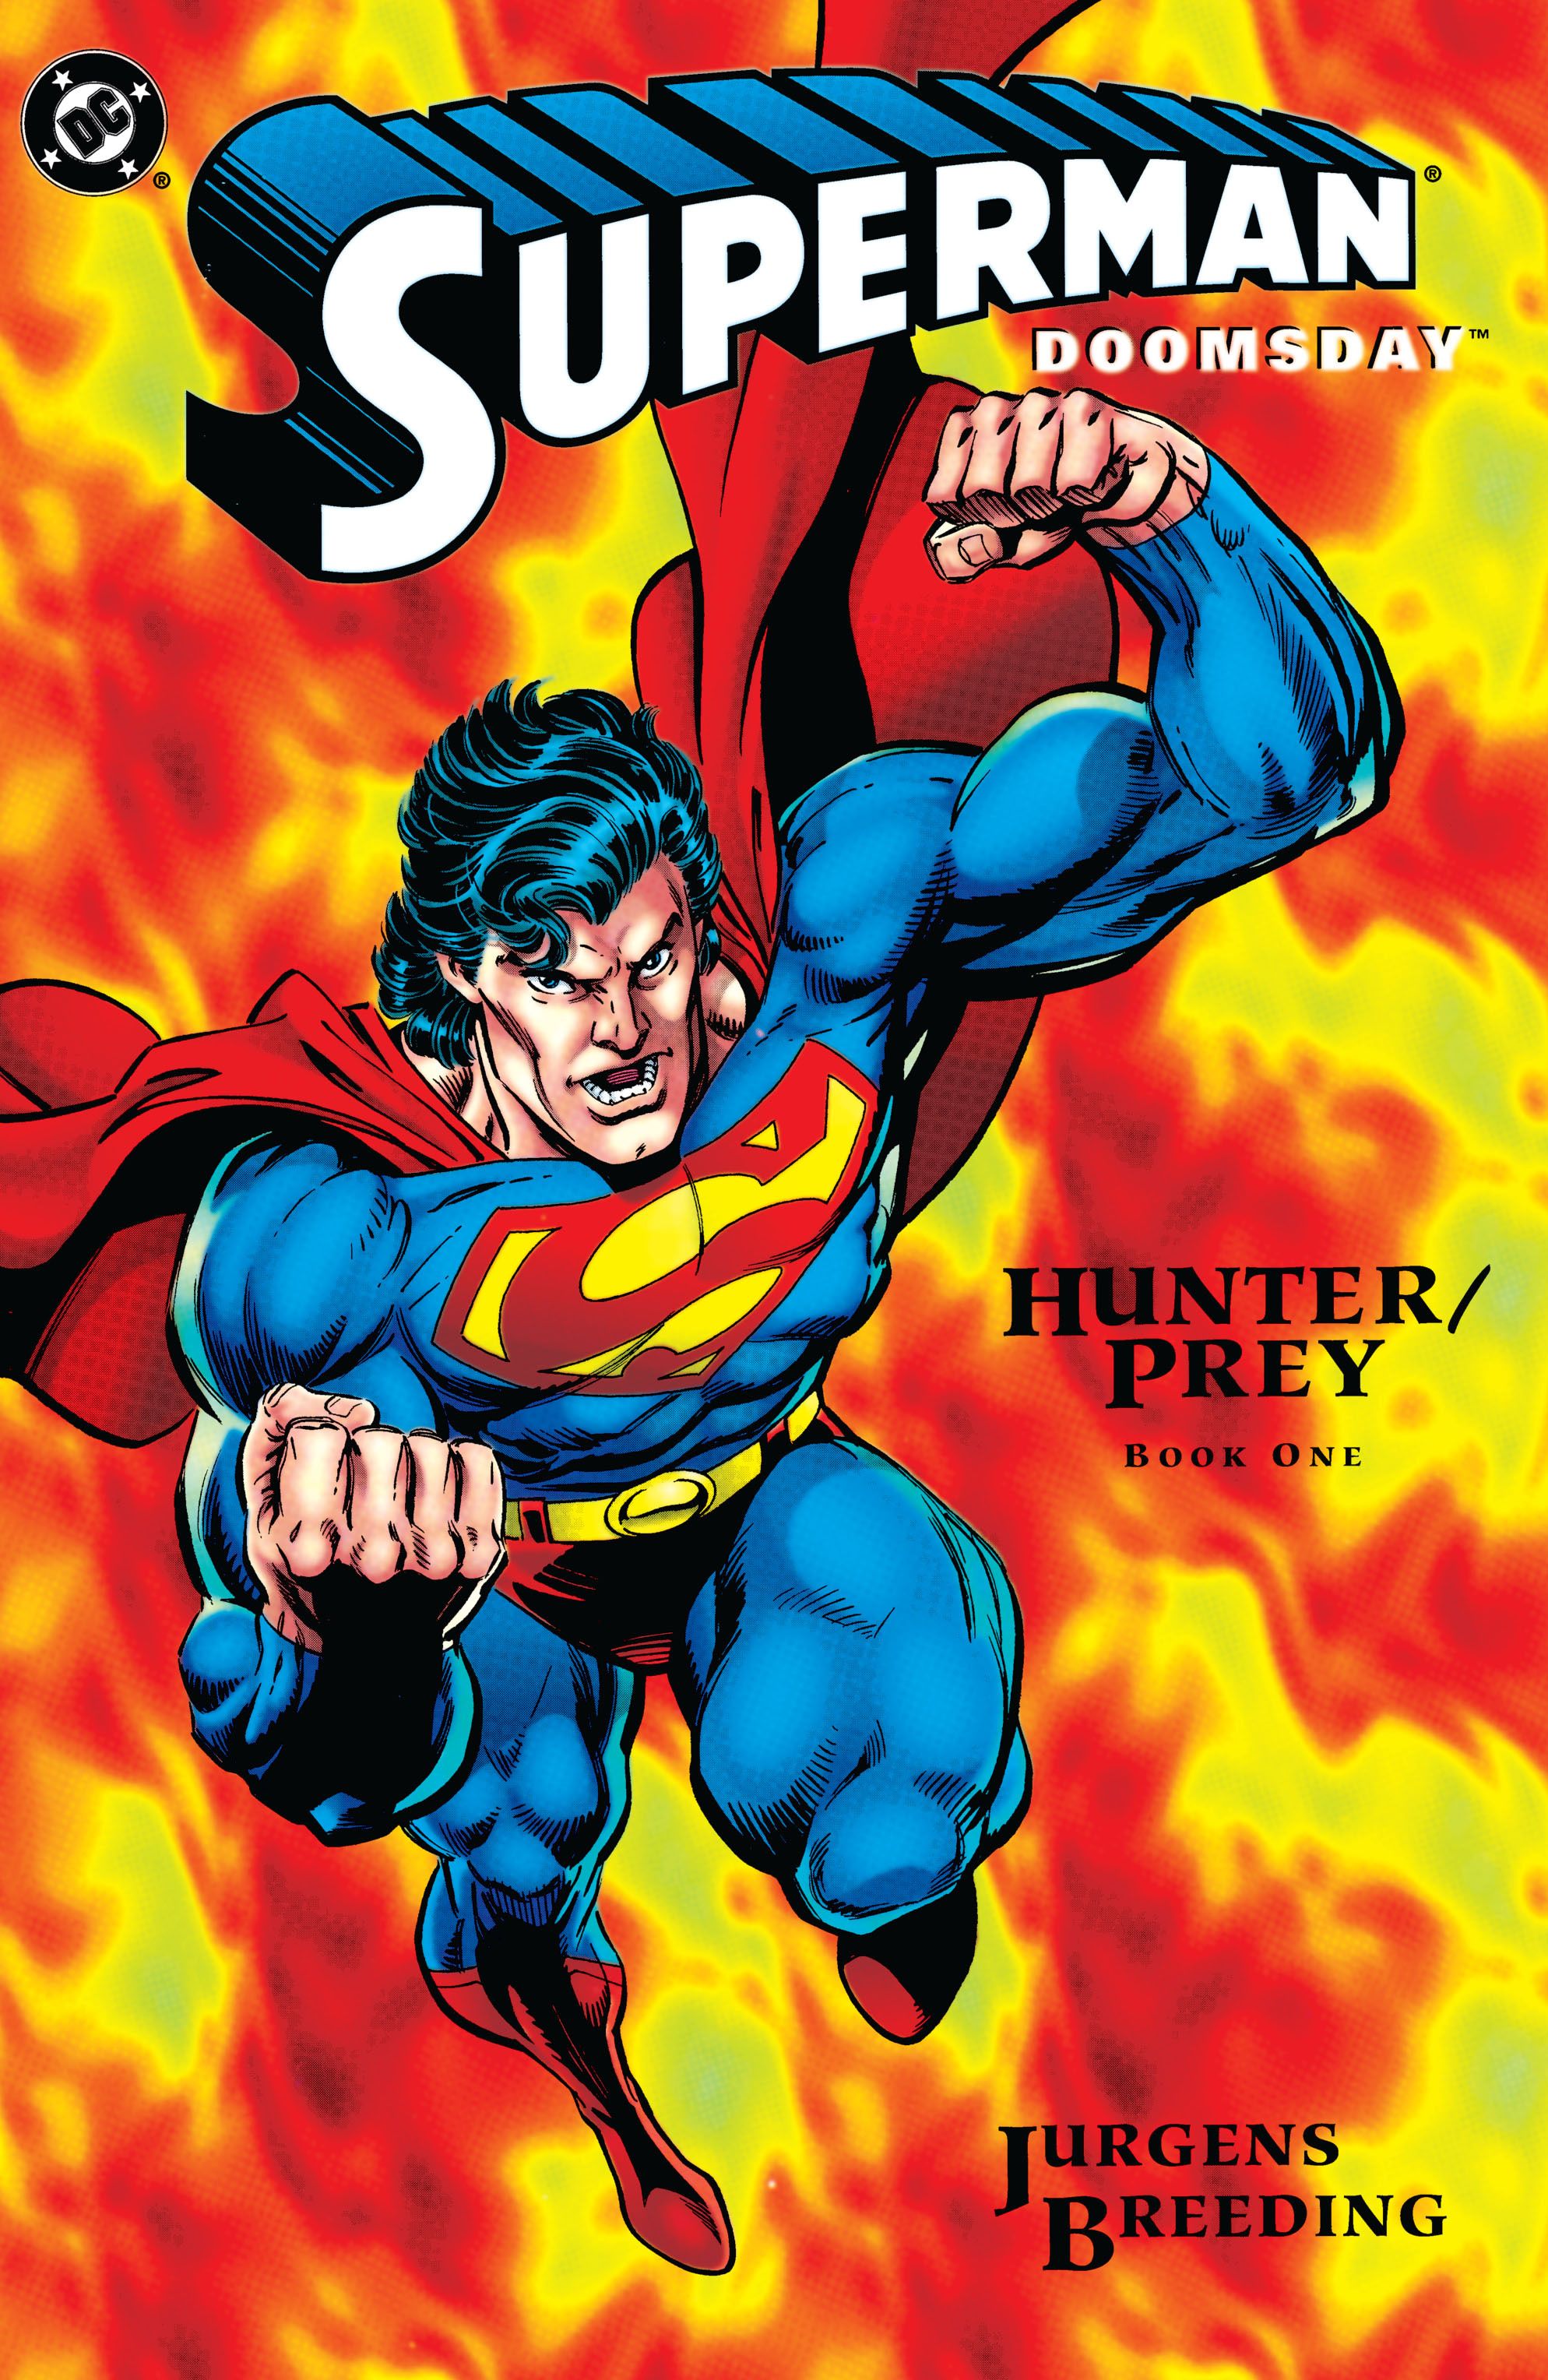 The cover of Superman-Doomsday Hunter-Prey #1